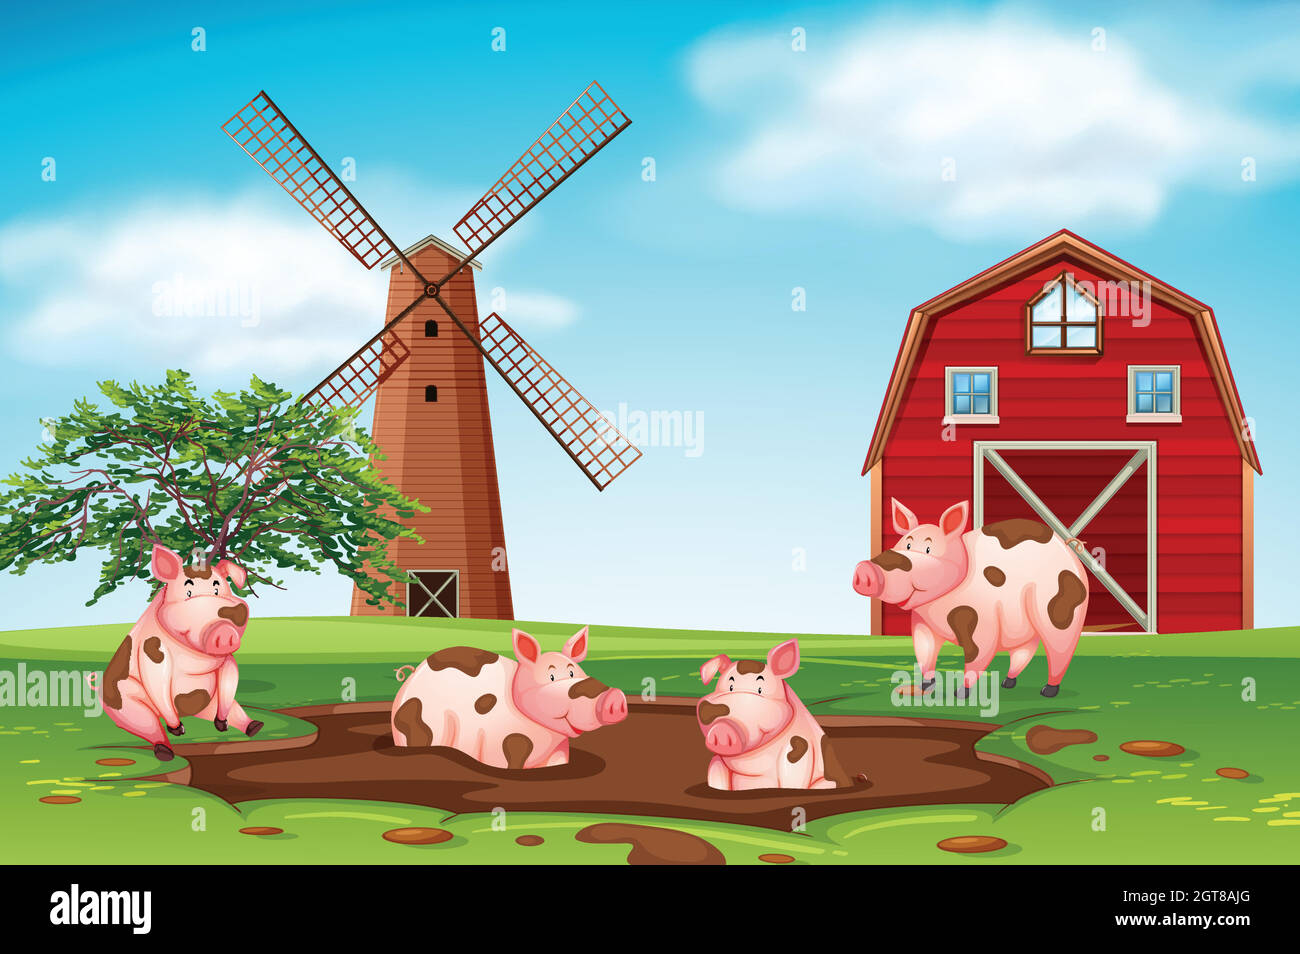 Pigs playing in mud farm scene Stock Vector